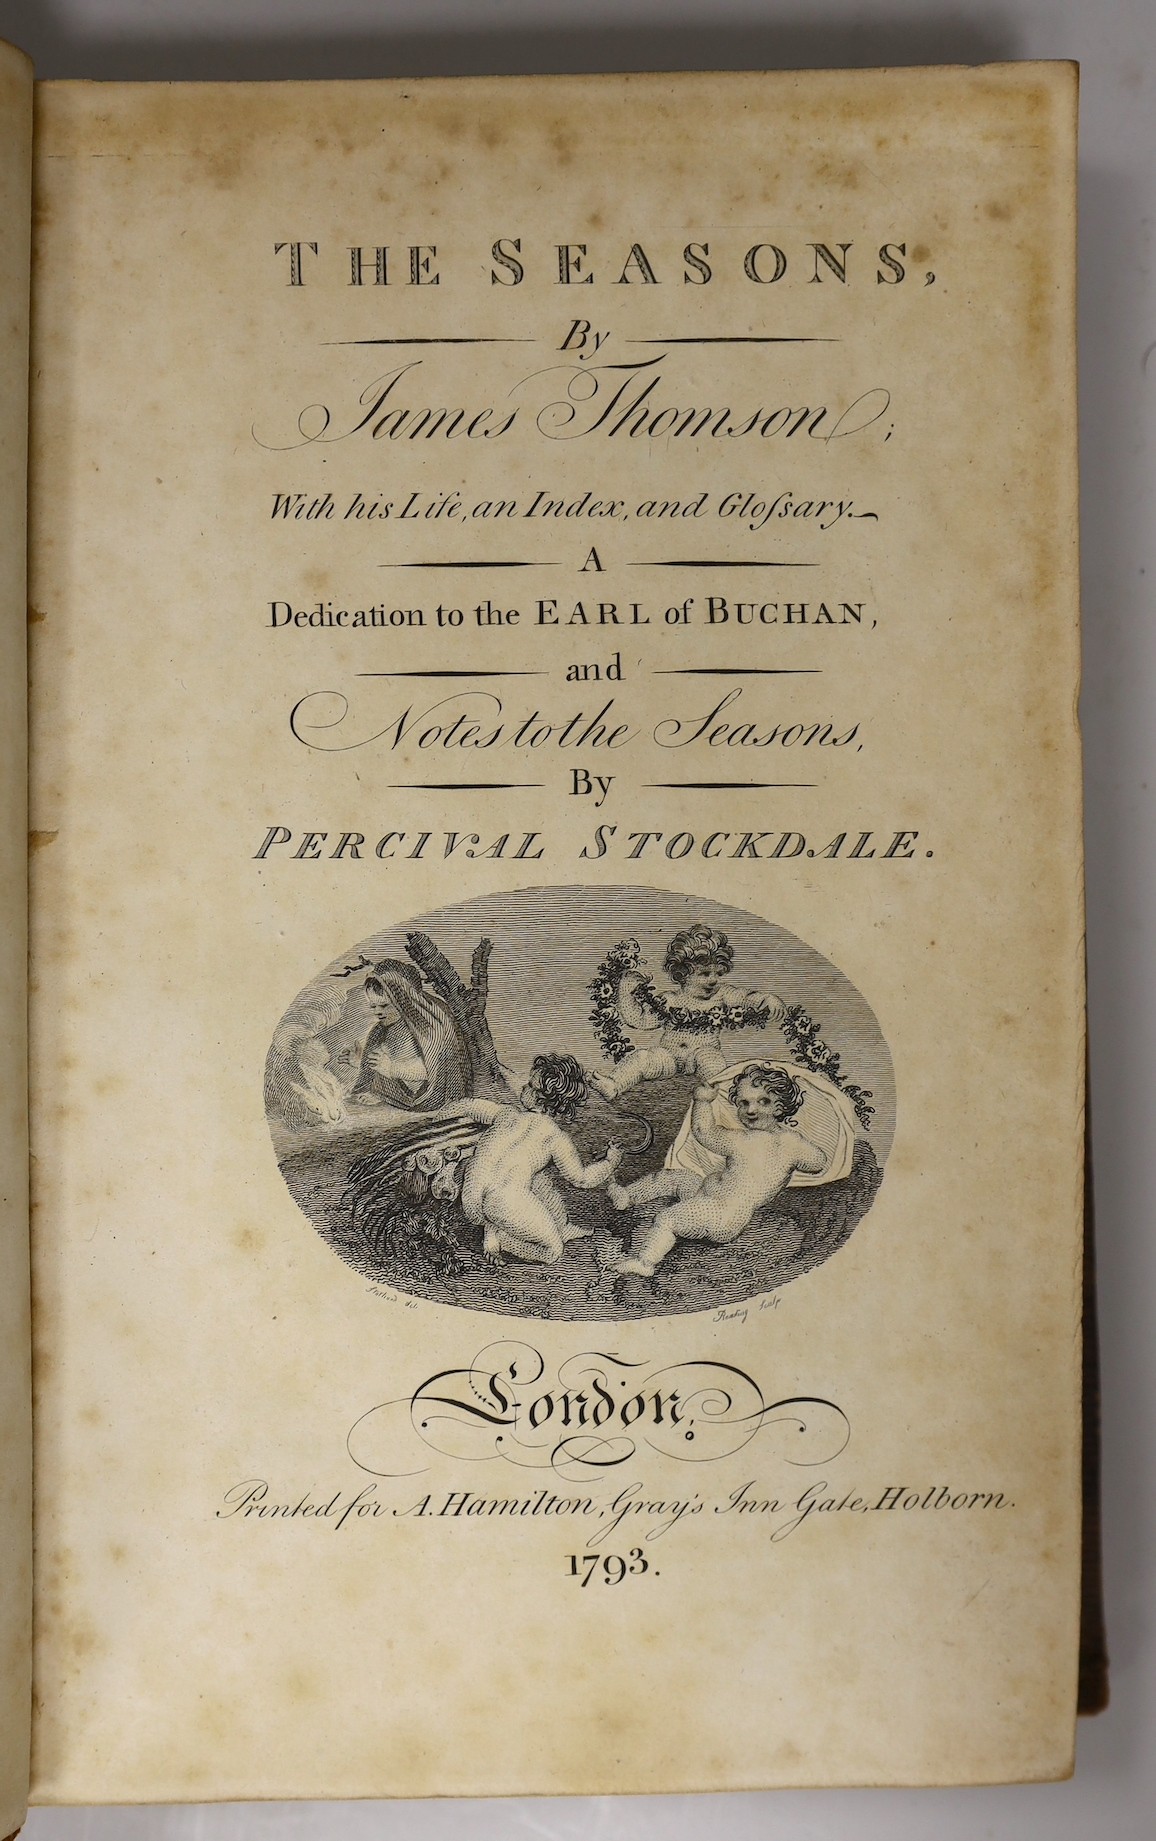 Thomson, James - The Seasons, edited by Percivil Stockdale, qto, calf, with portrait frontispiece, engraved title and 4 plates, browned and spotted throughout, A. Hamilton, London, 1793